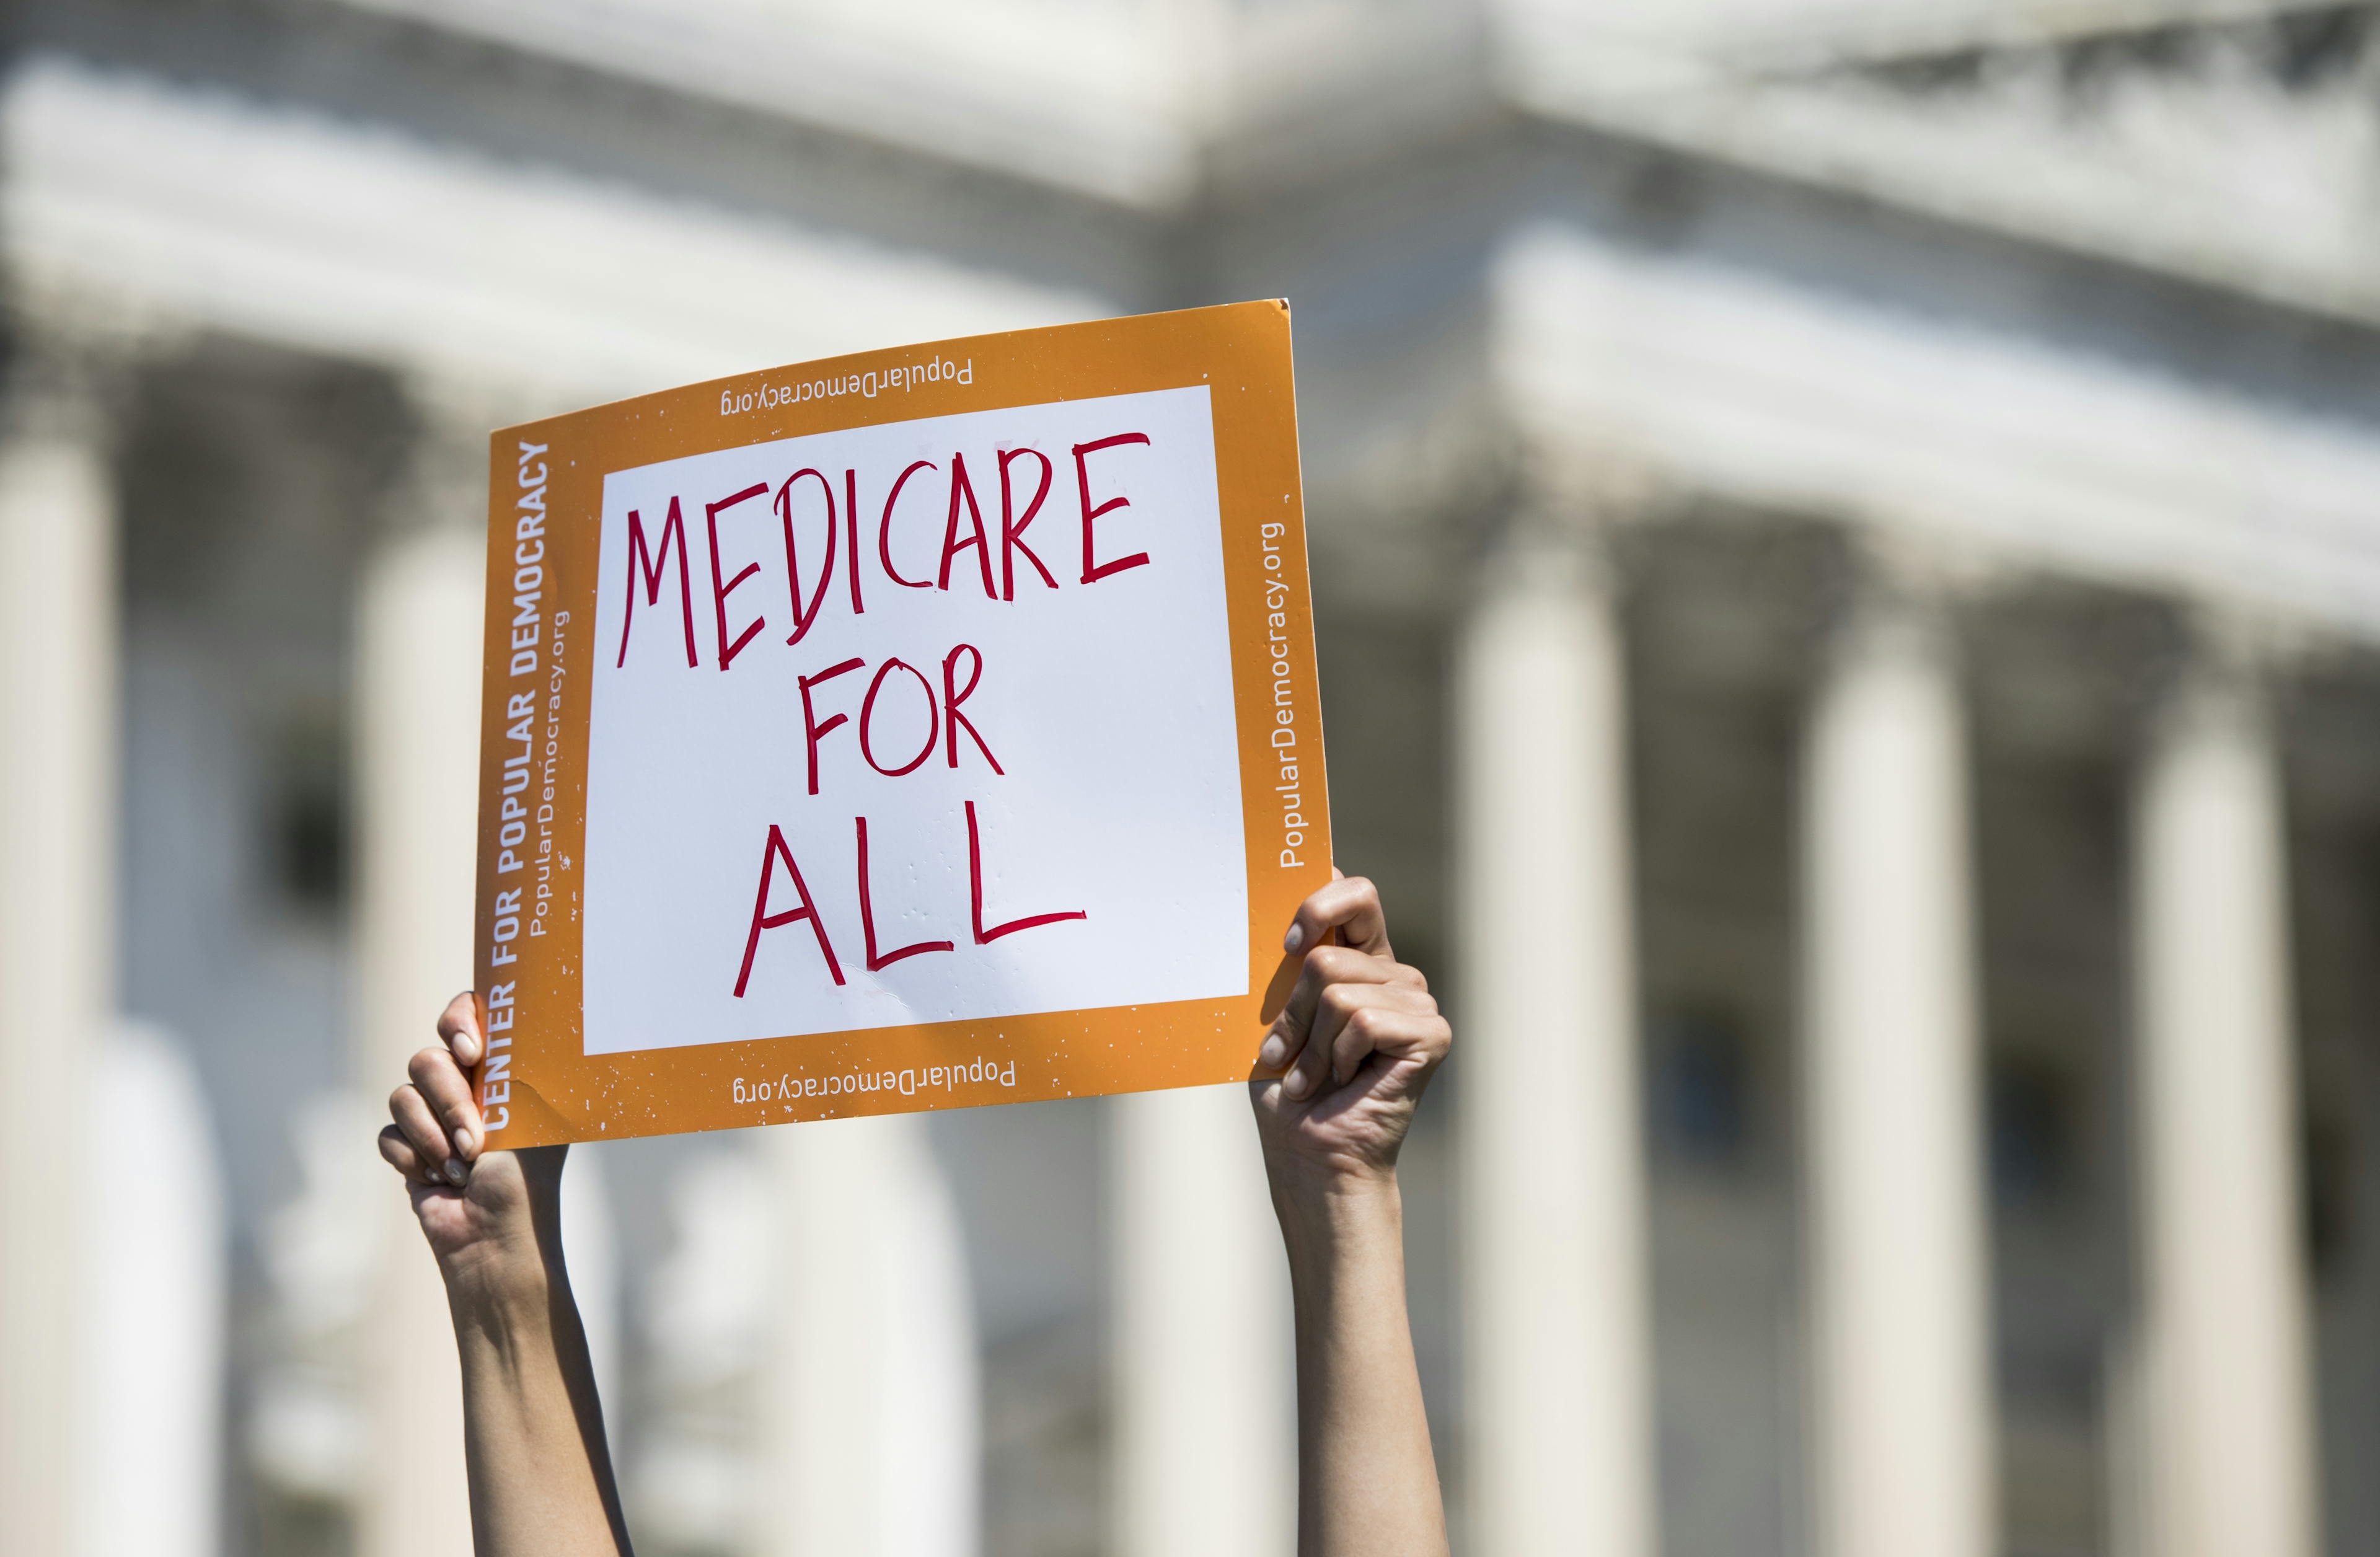 Medicare for all sign